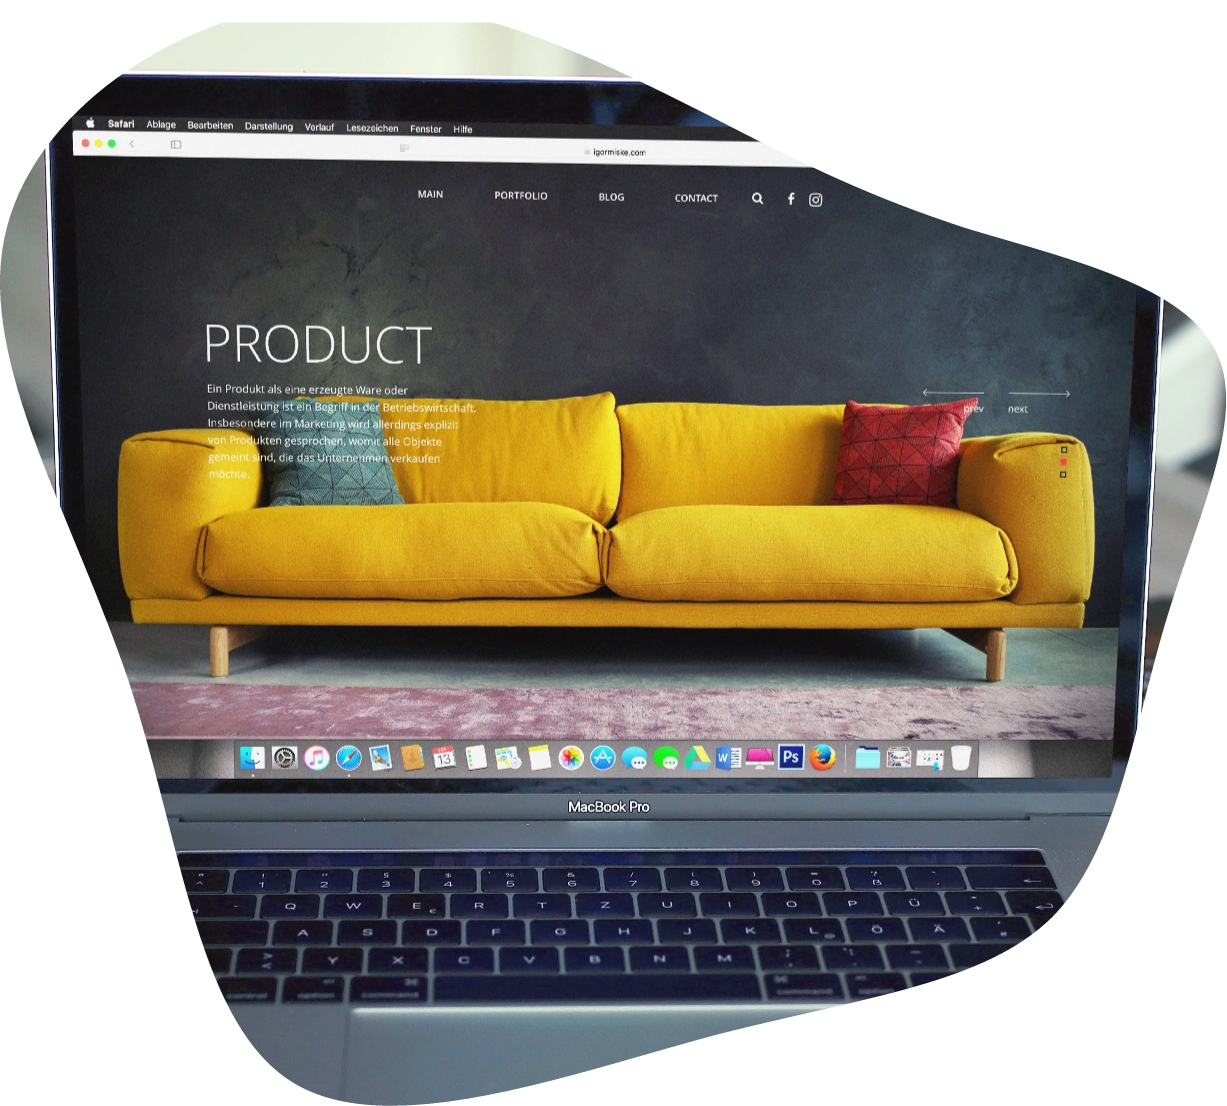 blobbed shaped image with a laptop showing a website with a bright yellow couch for sale